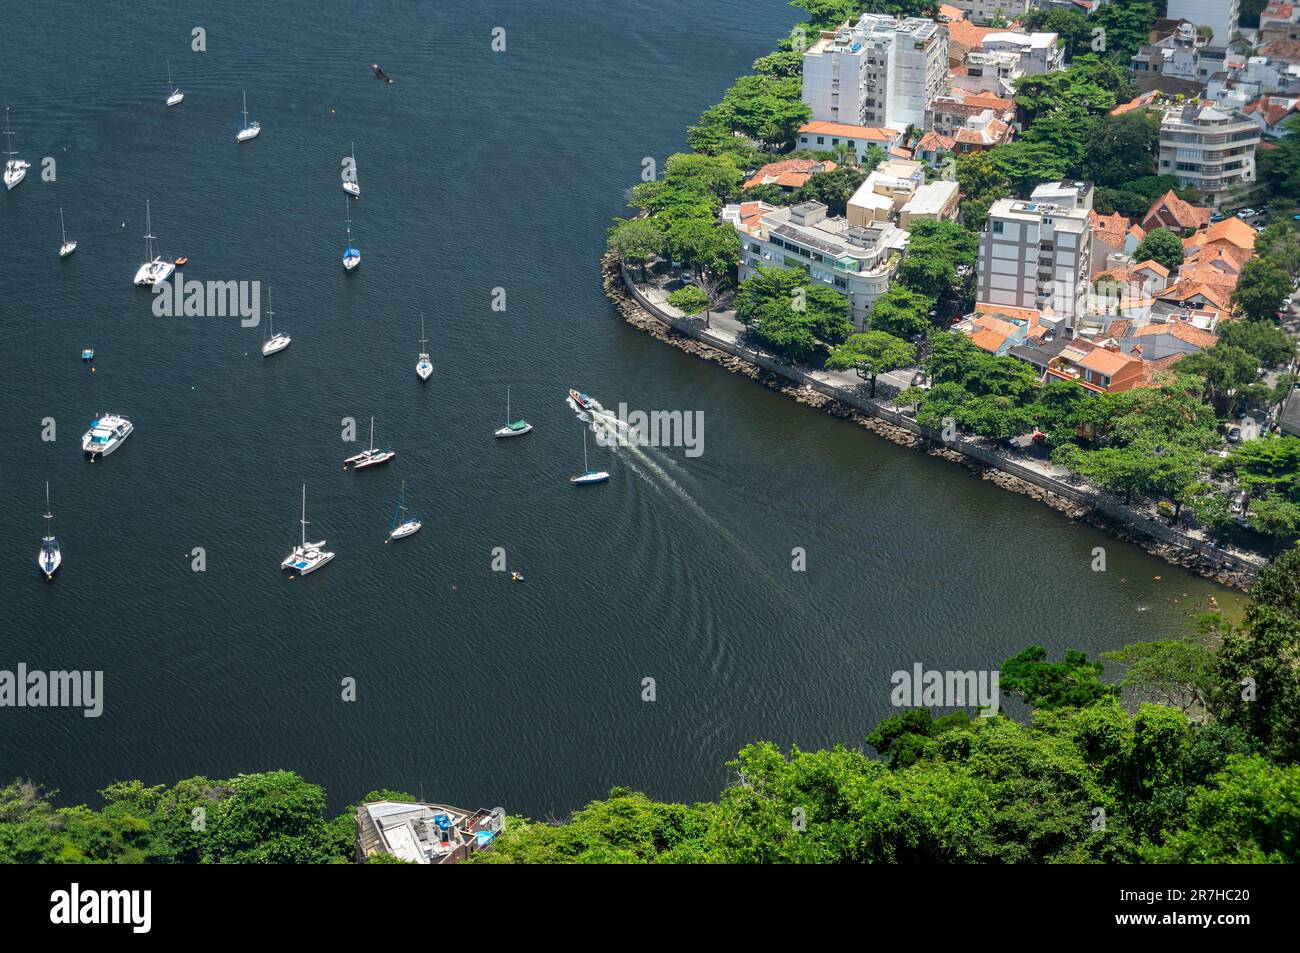 Partial view of Guanabara bay waters with some boats nearby Urca short wall and residential area buildings of Urca district in a summer sunny day. Stock Photo